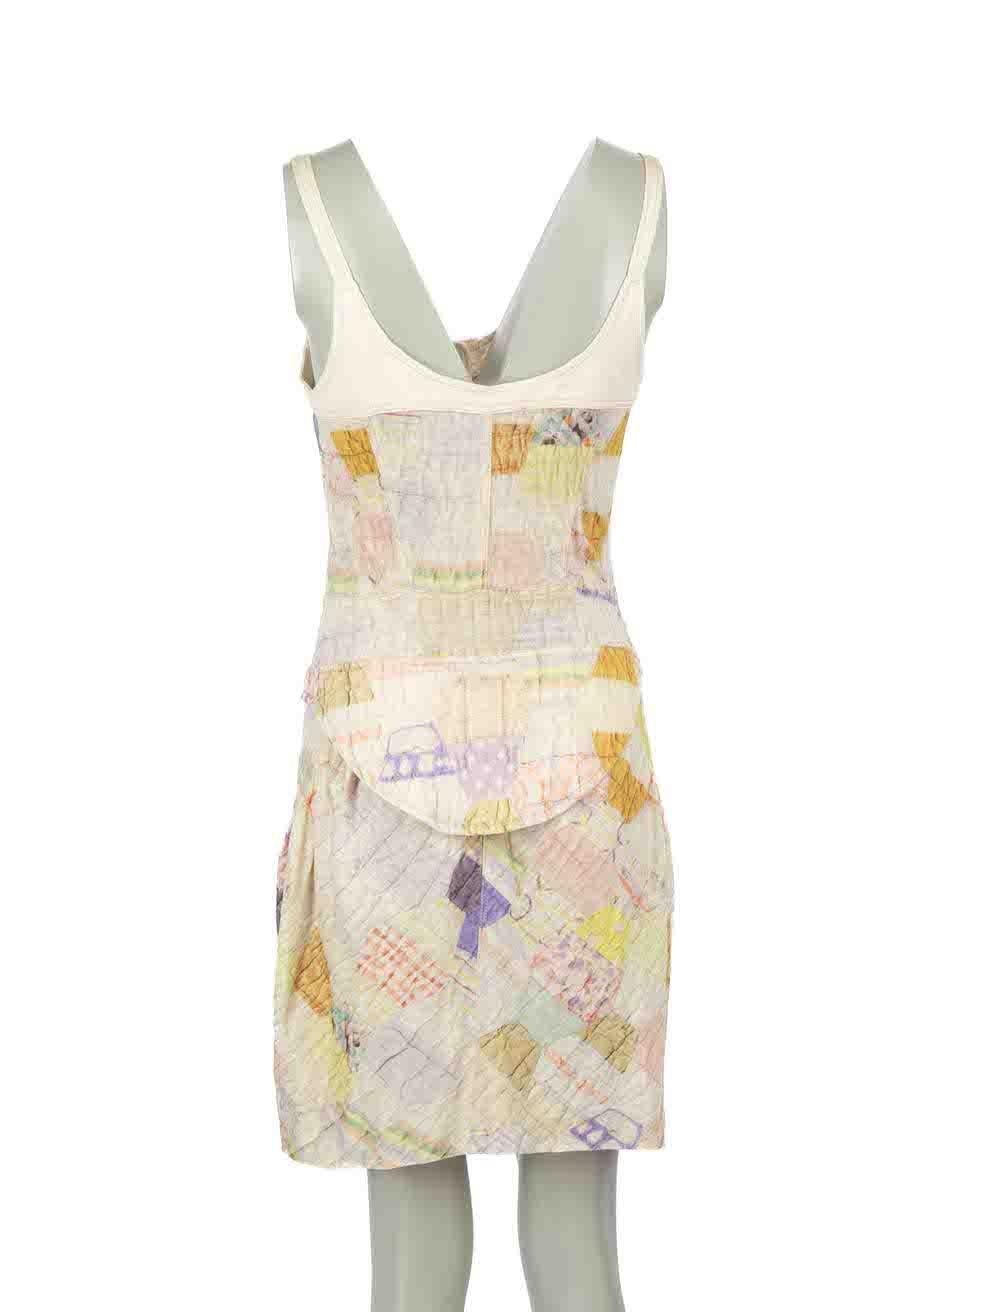 Isabel Marant Patchwork Print Sleeveless Dress Size S In Good Condition For Sale In London, GB